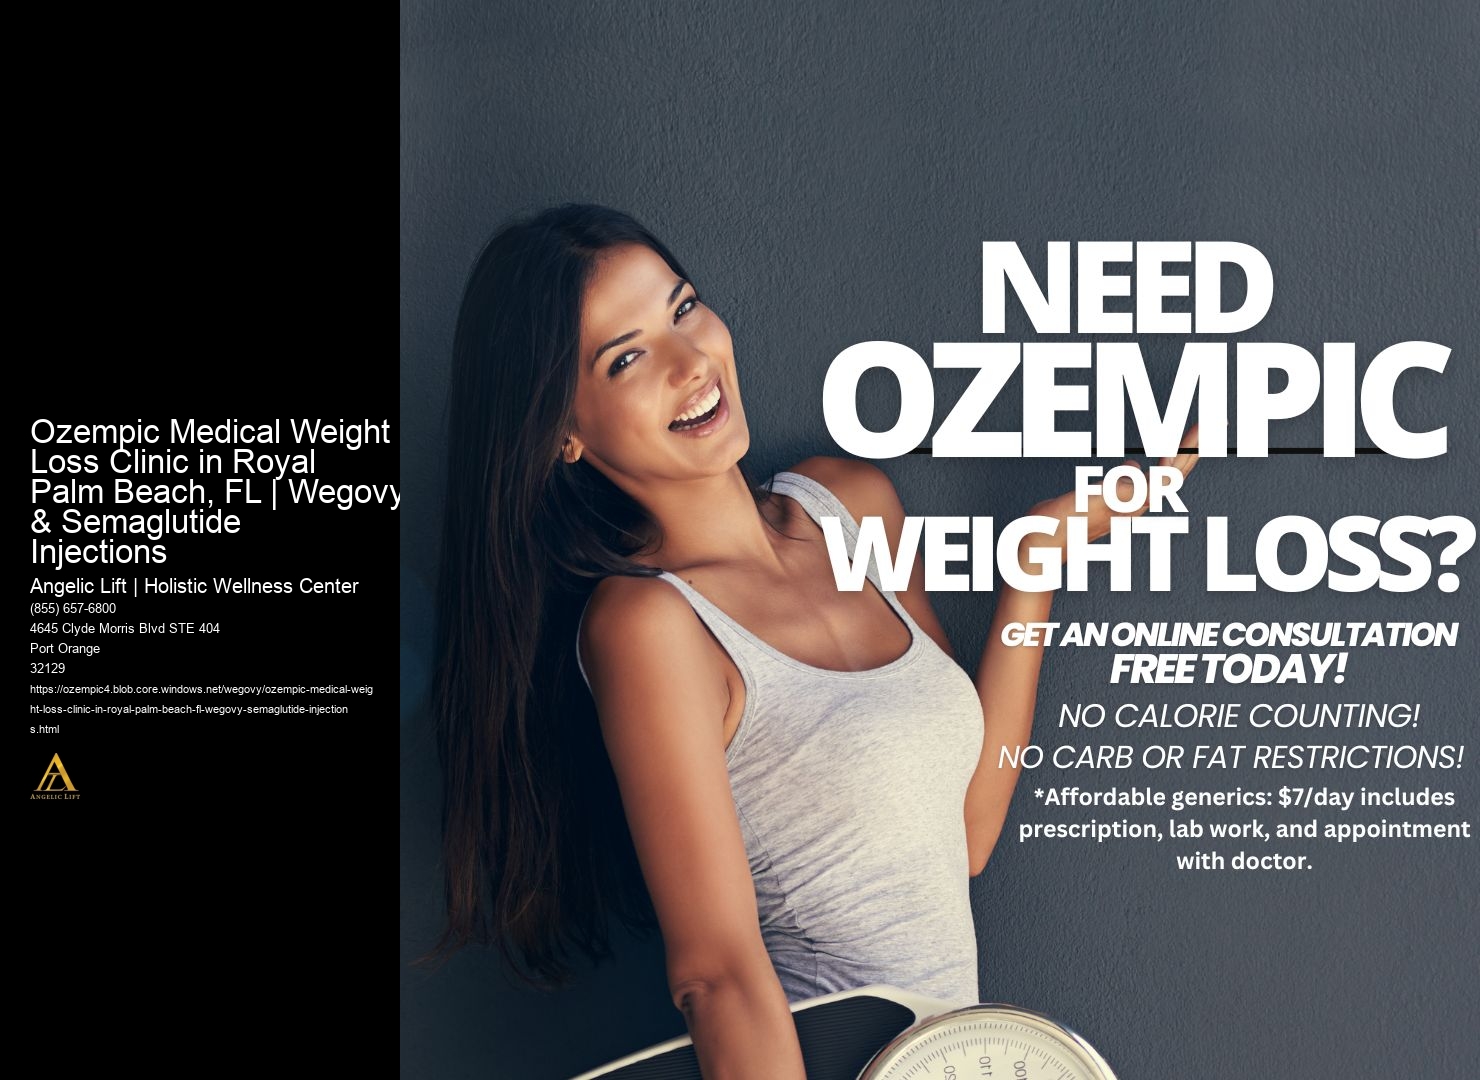 Ozempic Medical Weight Loss Clinic in Royal Palm Beach, FL | Wegovy & Semaglutide Injections